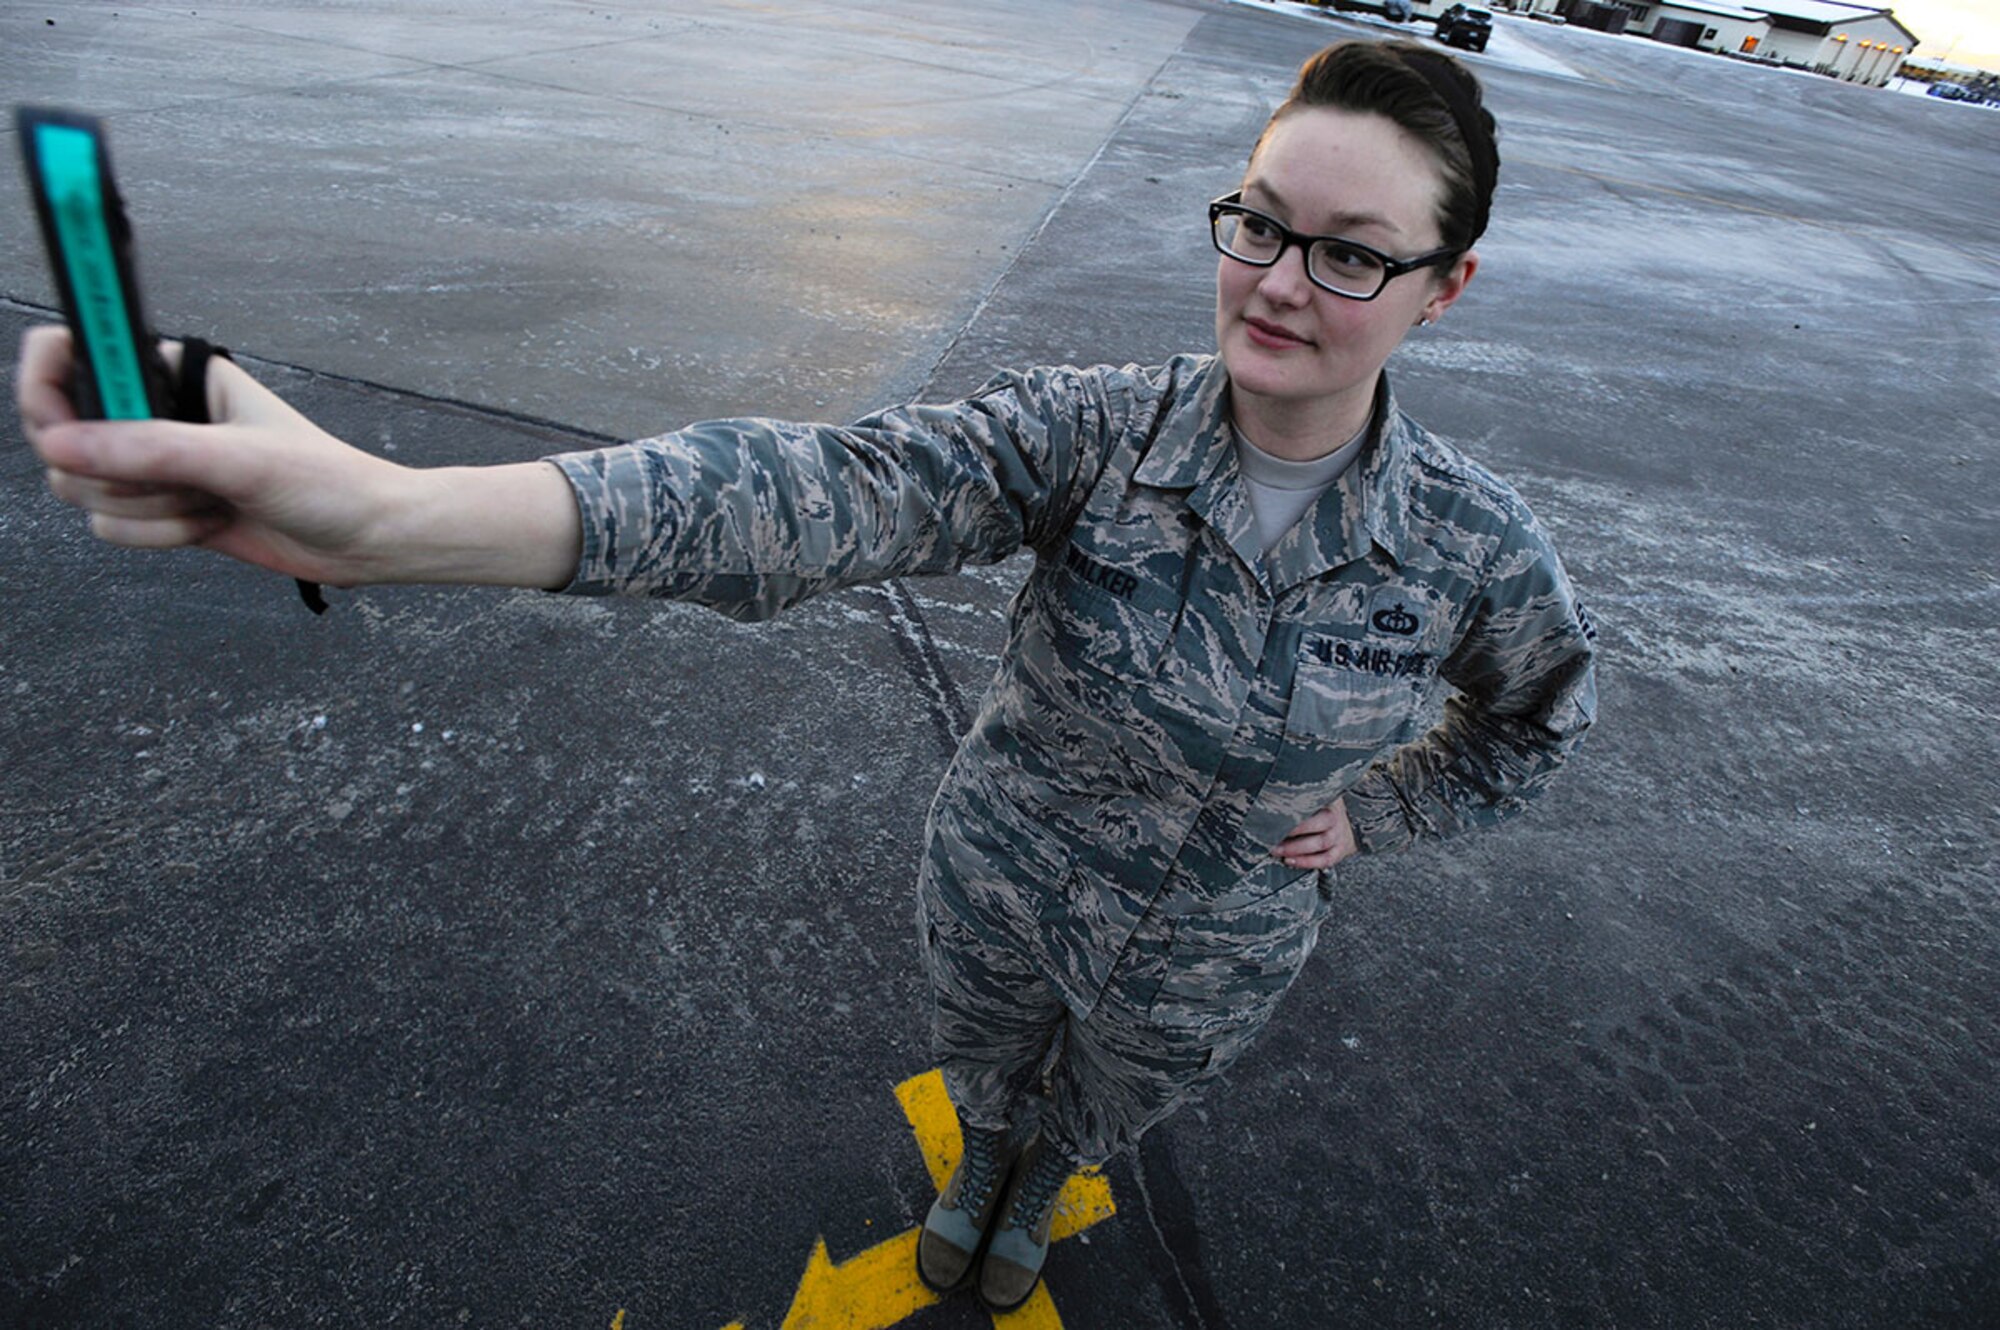 Staff Sgt. Dana Walker uses a kestrel meter to gauge wind and temperature readings from the official observing location, the most unobstructed view of the airfield, painted on the runway at Joint Base Elmendorf-Richardson, Alaska, Dec. 28, 2014. Walker is a weather forecaster assigned to the 3rd Operations Support Squadron. (U.S. Air Force photo/Staff Sgt. Robert Barnett)